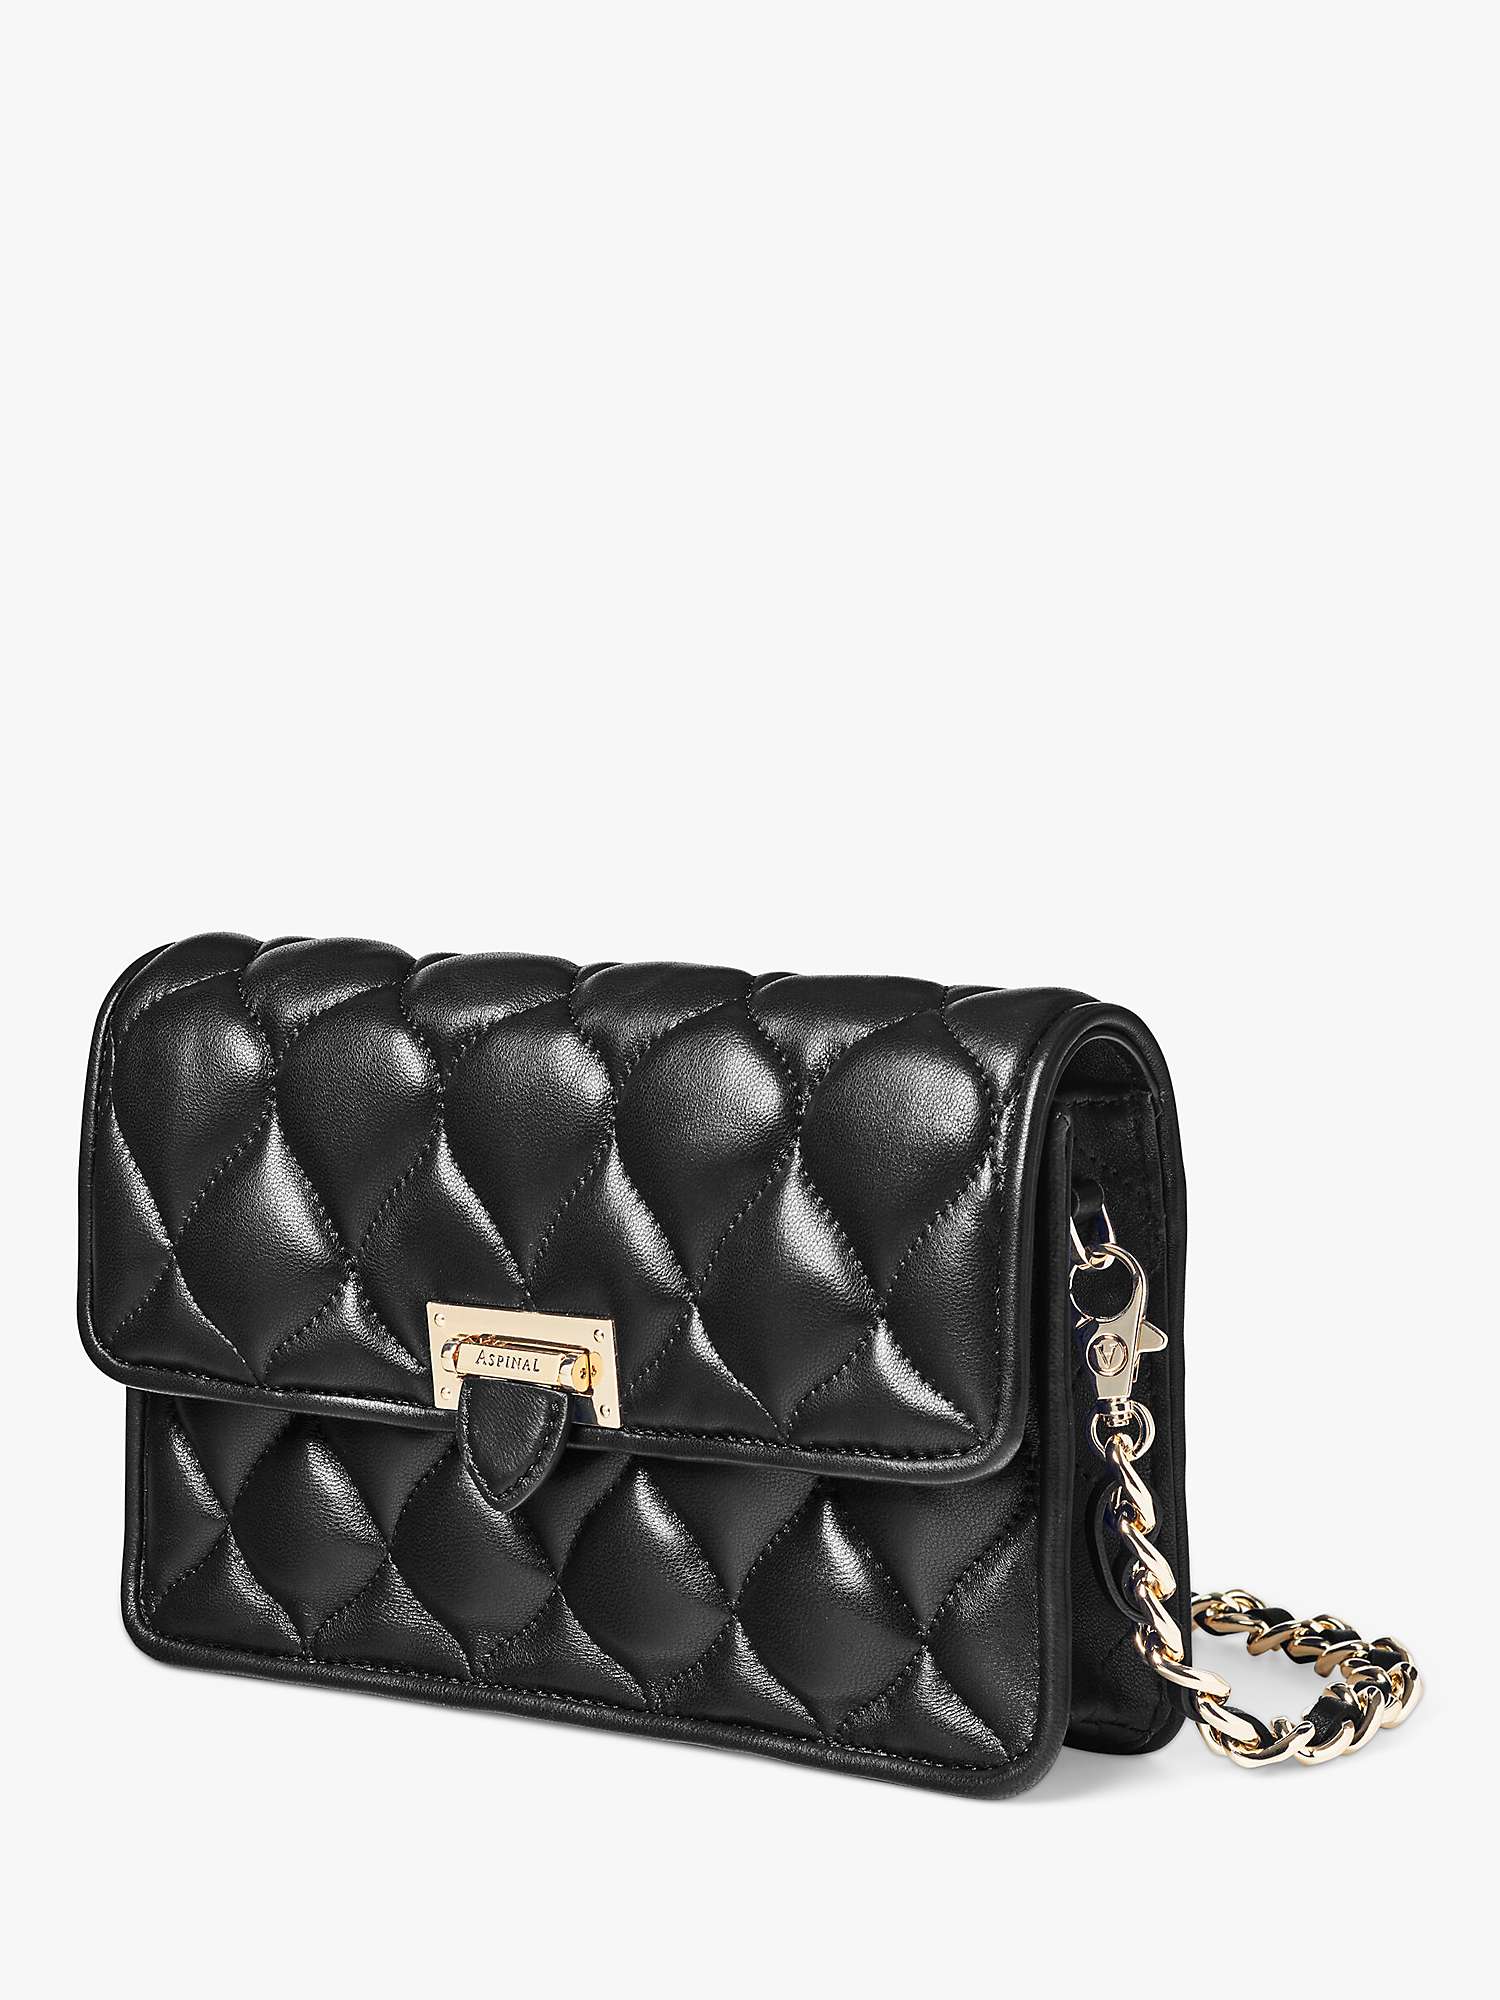 Buy Aspinal of London Lottie Pillow Quilted Lambskin Clutch Bag Online at johnlewis.com